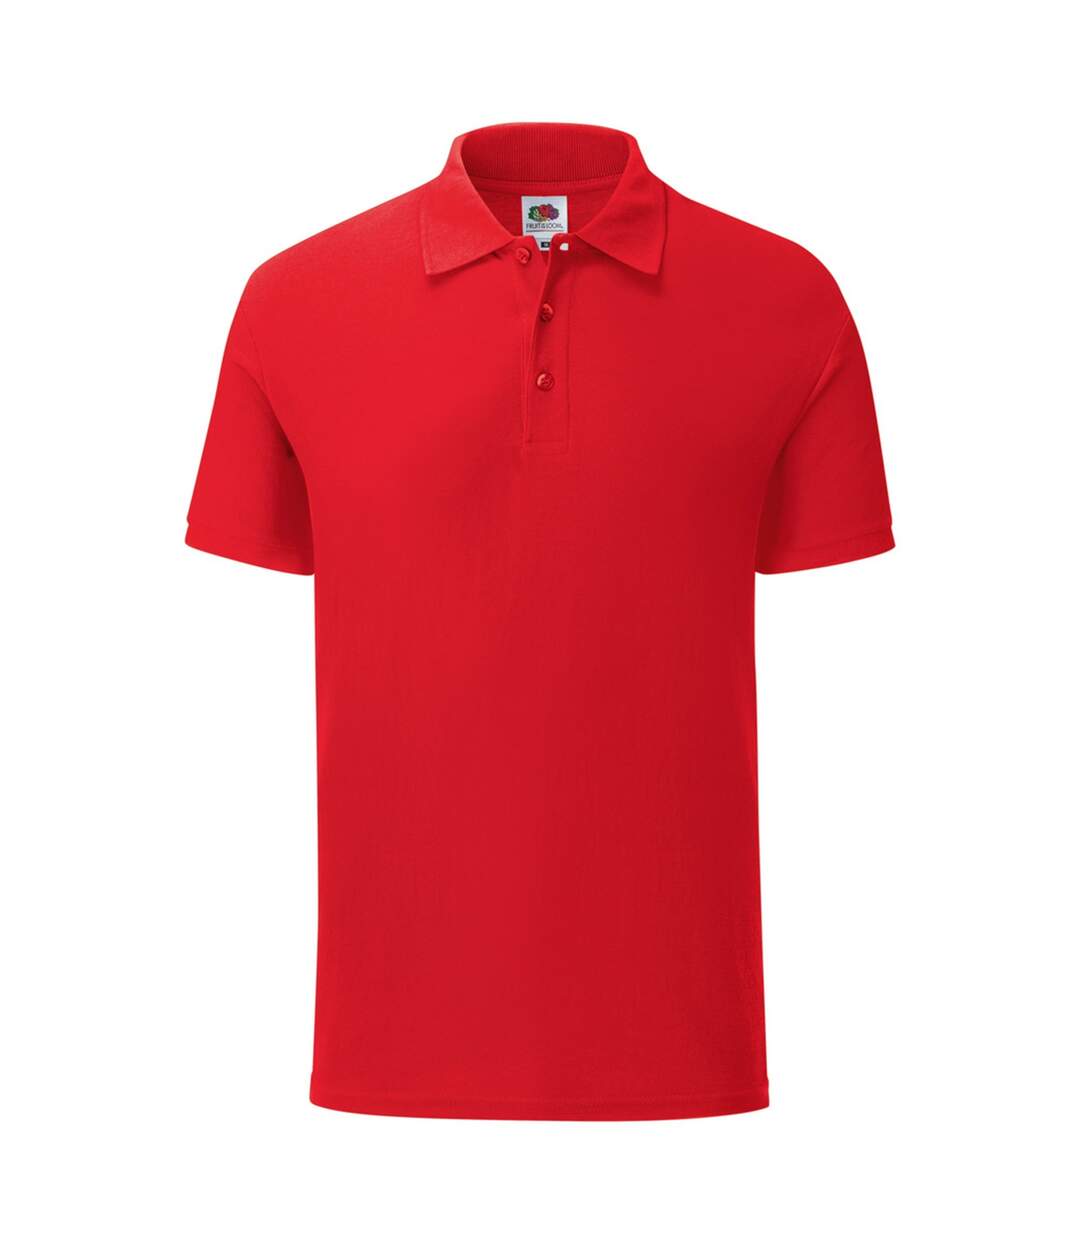 Fruit Of The Loom Mens Iconic Pique Polo Shirt (Red) - UTPC3571